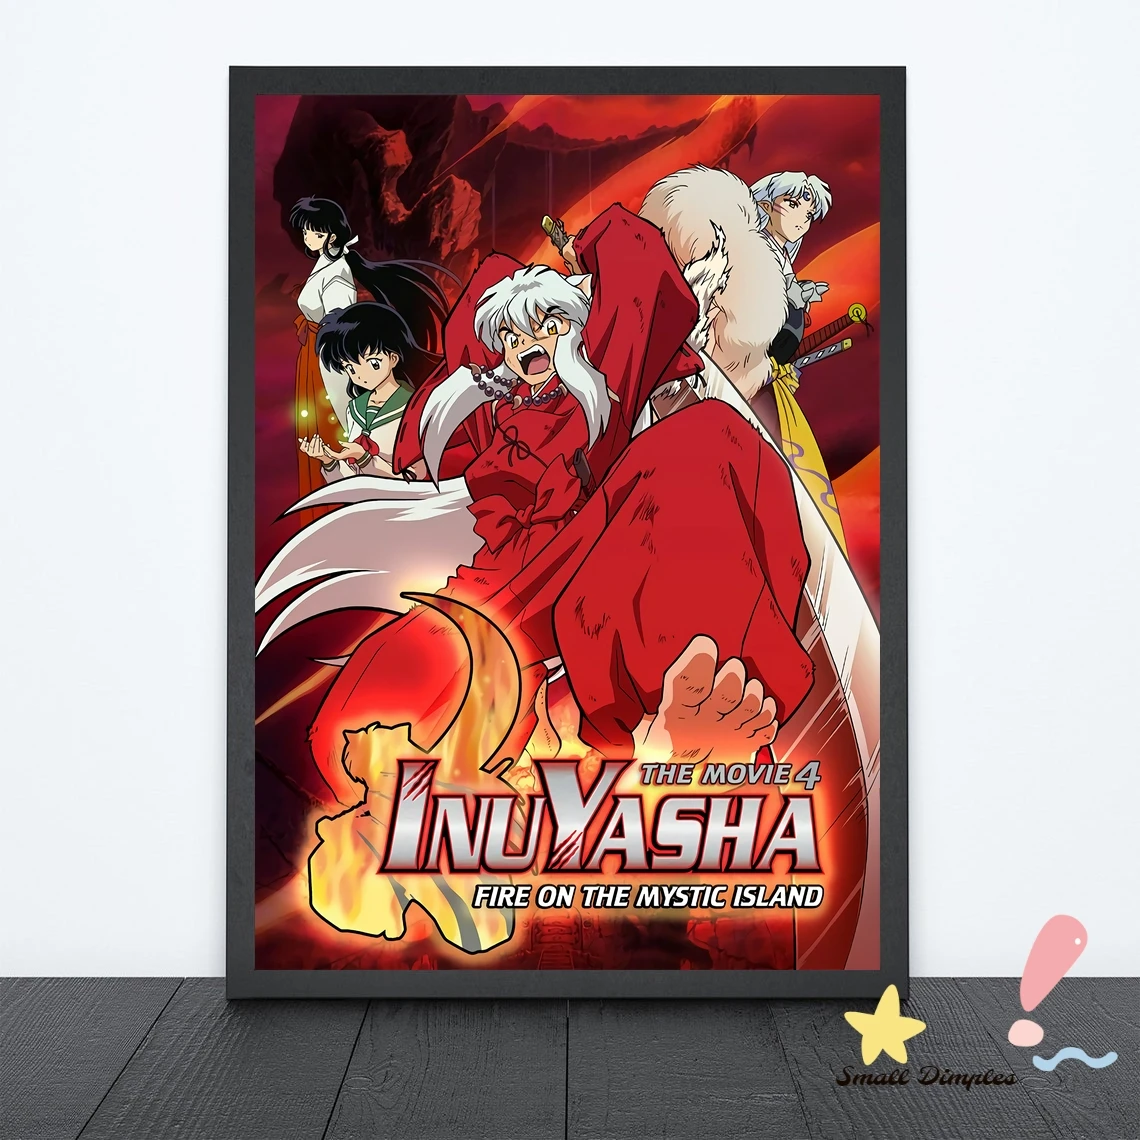 

Nuyasha The Movie 3 Swords Of An Honorable Ruler Anime Poster Canvas Art Print Home Decoration Wall Painting ( No Frame )